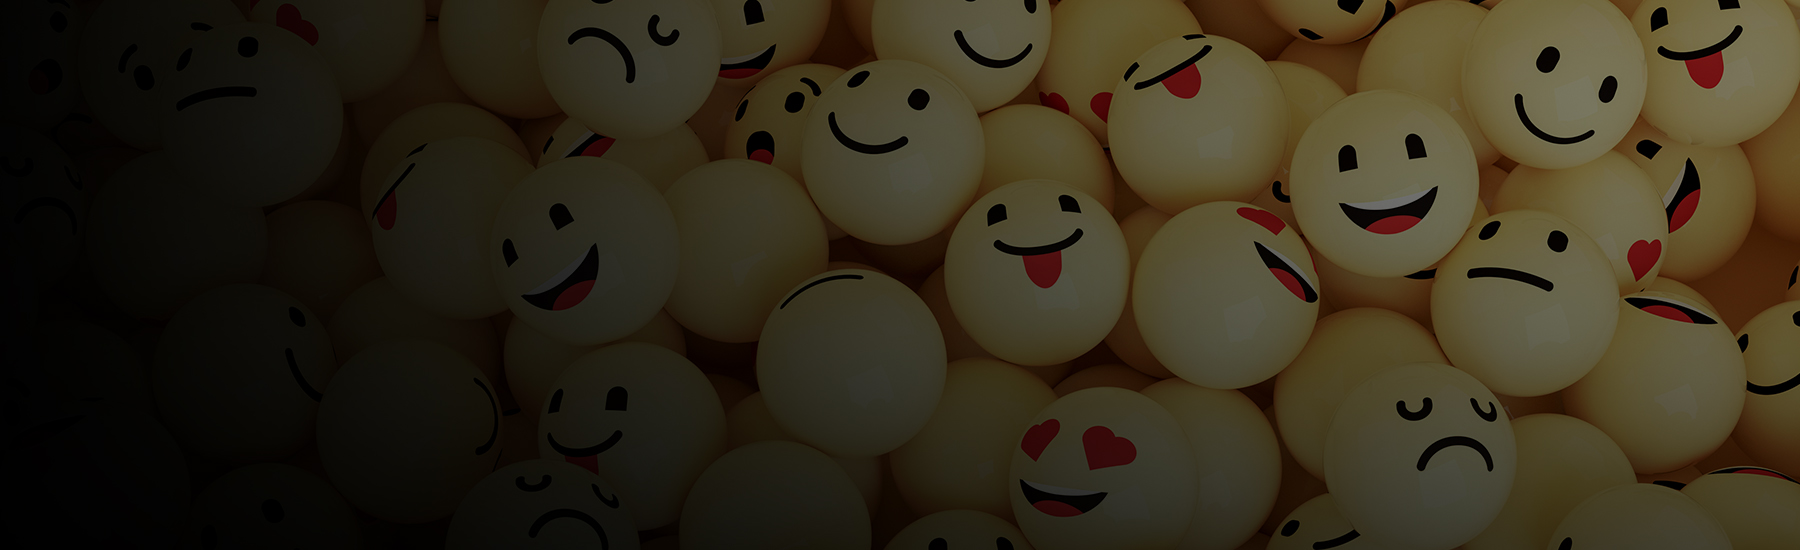 Bouncy balls decorated with different smiley faces, desktop hero.